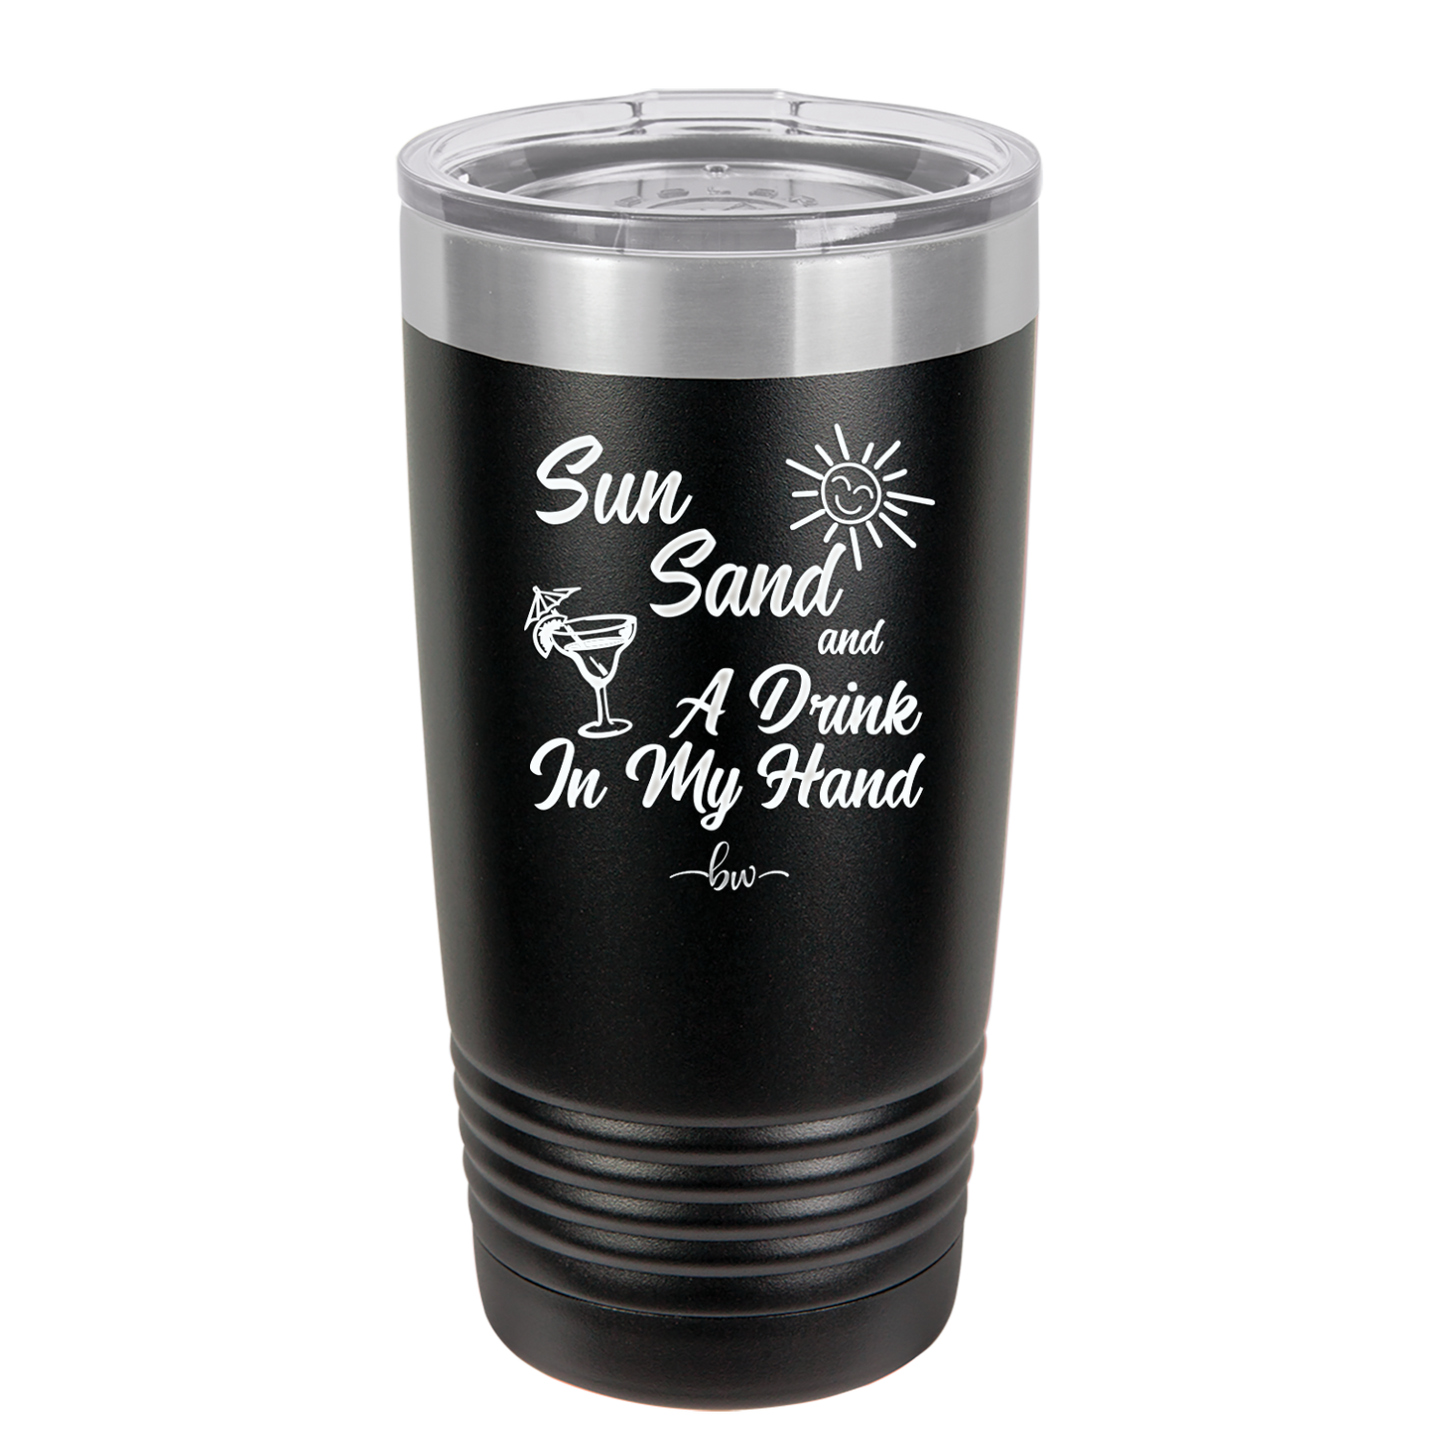 Sun Sand and a Drink in My Hand - Laser Engraved Stainless Steel Drinkware - 1034 -